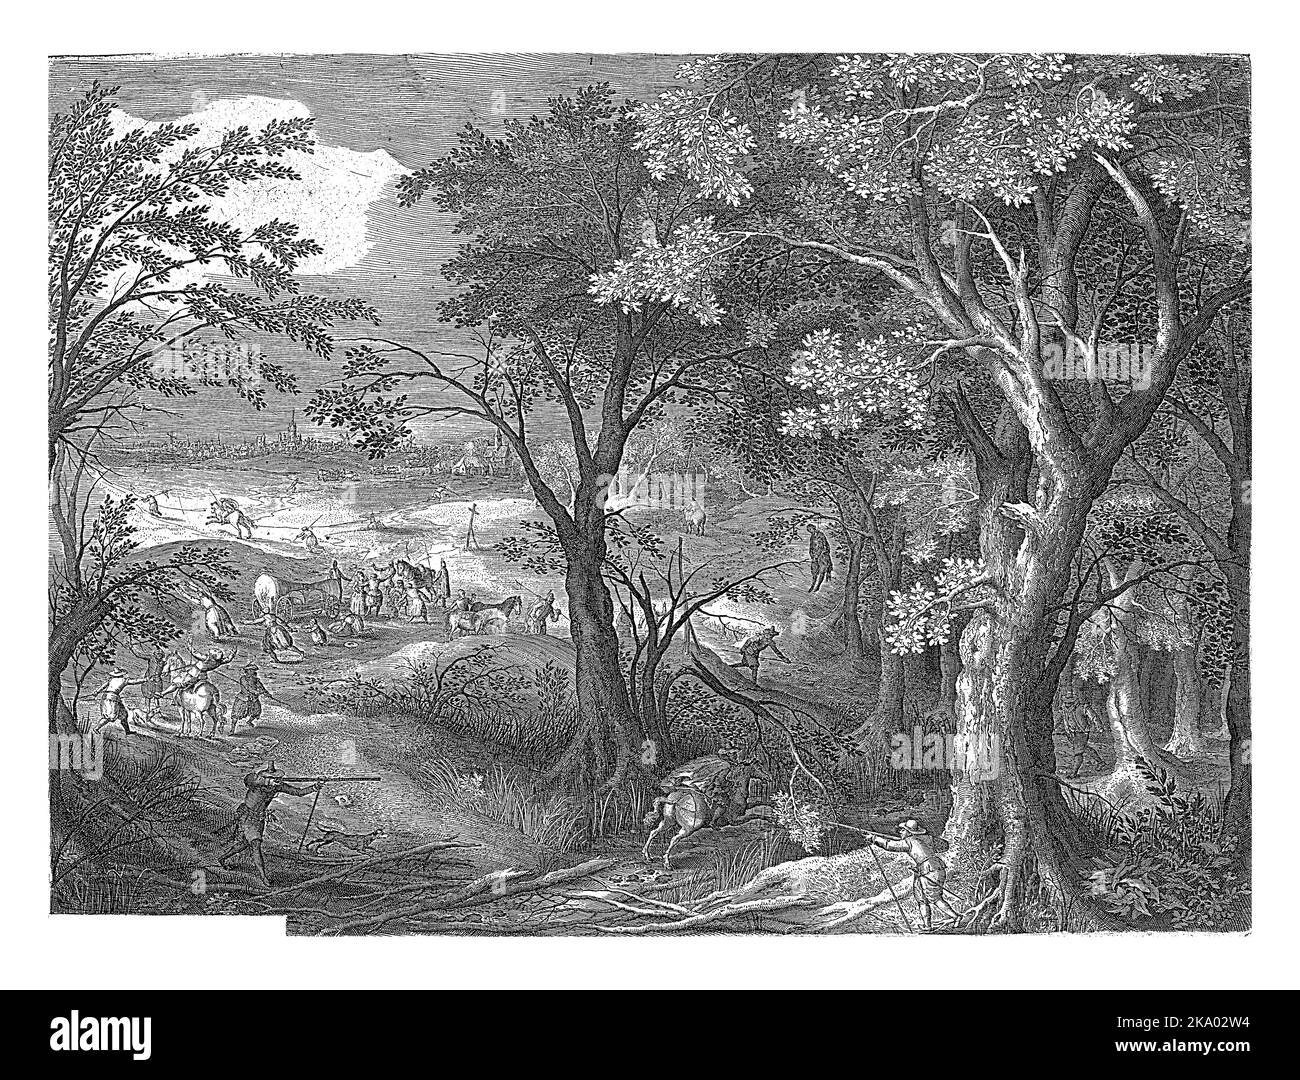 A gang of highwaymen ambushed travelers in a wooded landscape. The robbers search the carriage while the travelers are attacked and try to flee. Stock Photo